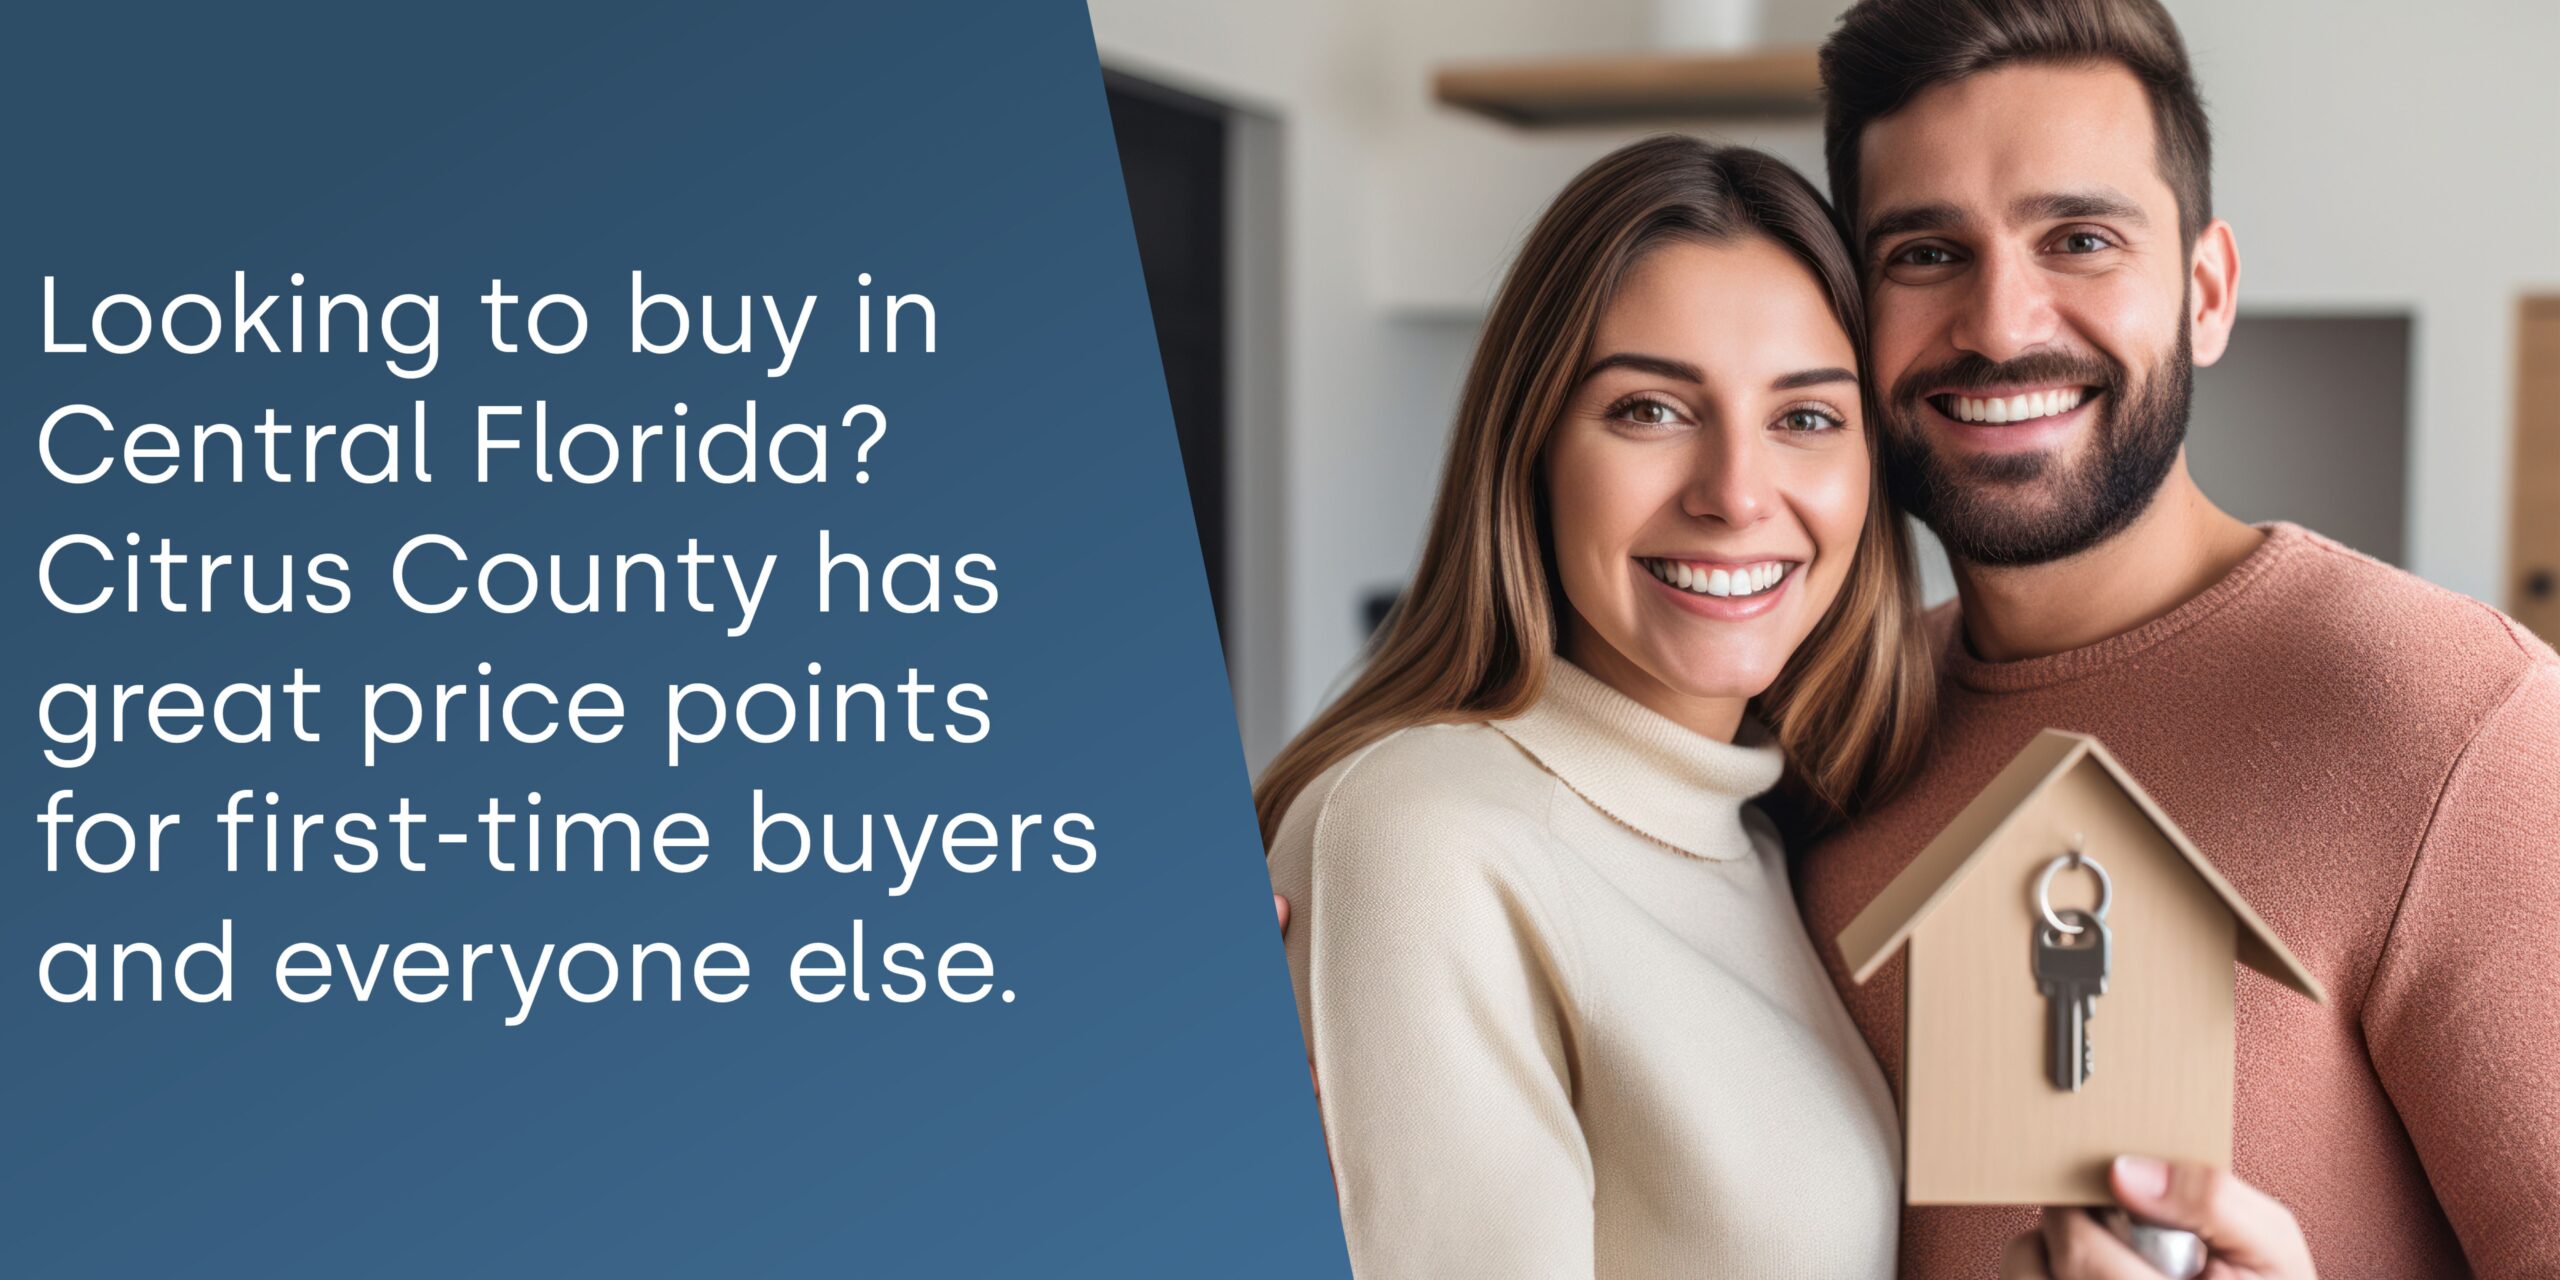 Looking to buy in Central Florida? Citrus County has great price points for first-time buyers and everyone else - Young couple holding miniature house with key